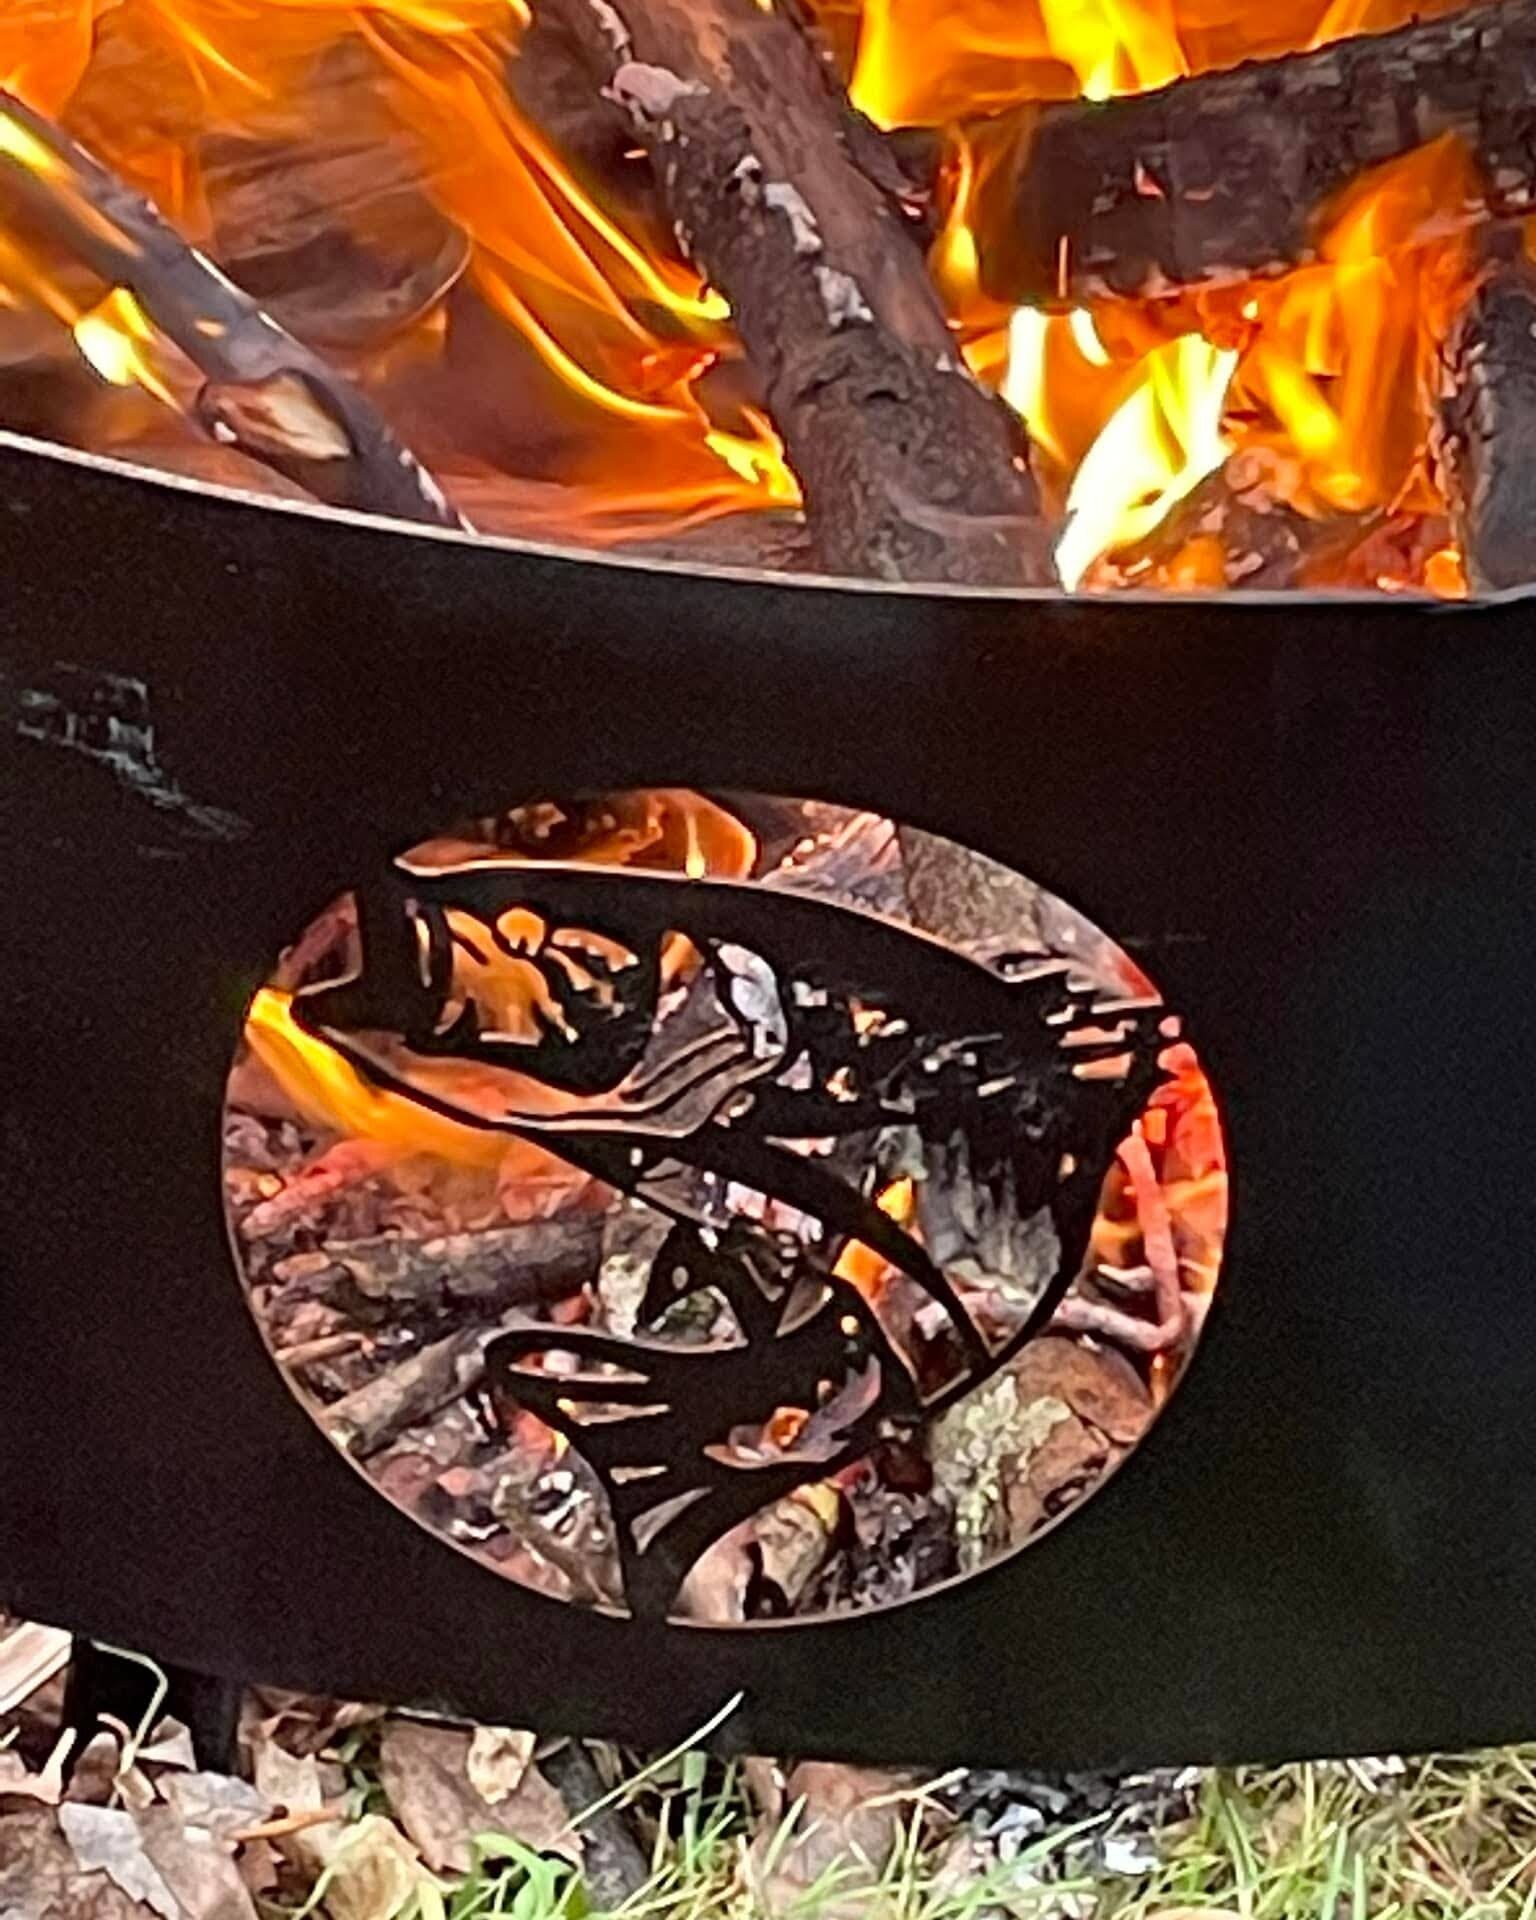 𝆕𝇥𝅘𝅥𝅮𝅘𝅥 Chestnuts roasting by the open fire ring 𝆕𝇥𝅘𝅥𝅮𝅘𝅥

We are being creative with the lyrics with this classic and encourage YOU to be creative when designing a custom fire ring: hobbies, name, school, sports, business logo, and so much more! Al